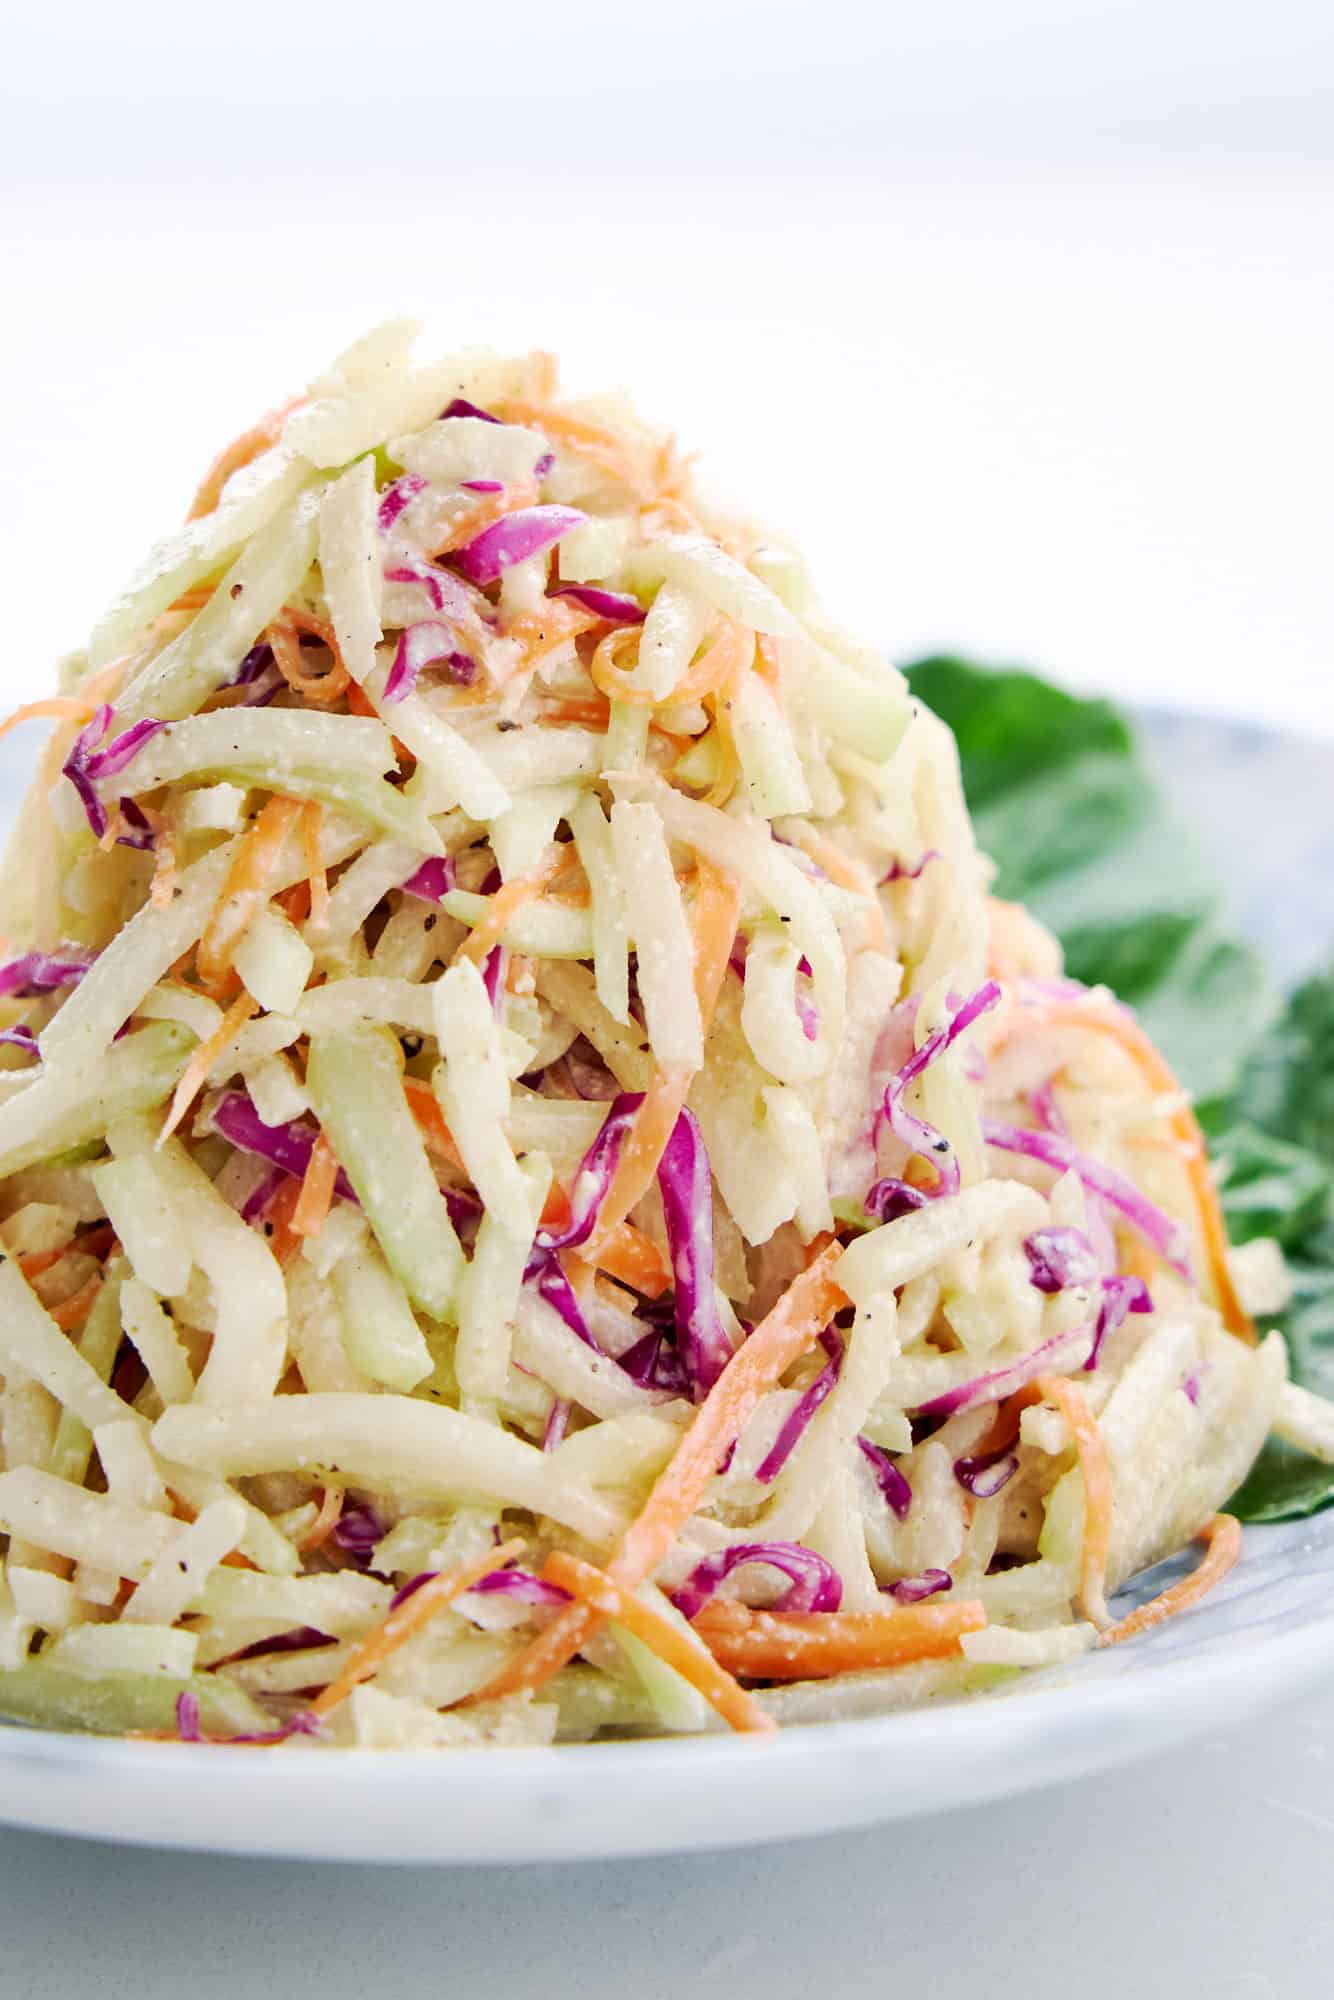 Crunchy mound of kohlrabi coleslaw with a tangy and creamy cashew nut dressing.